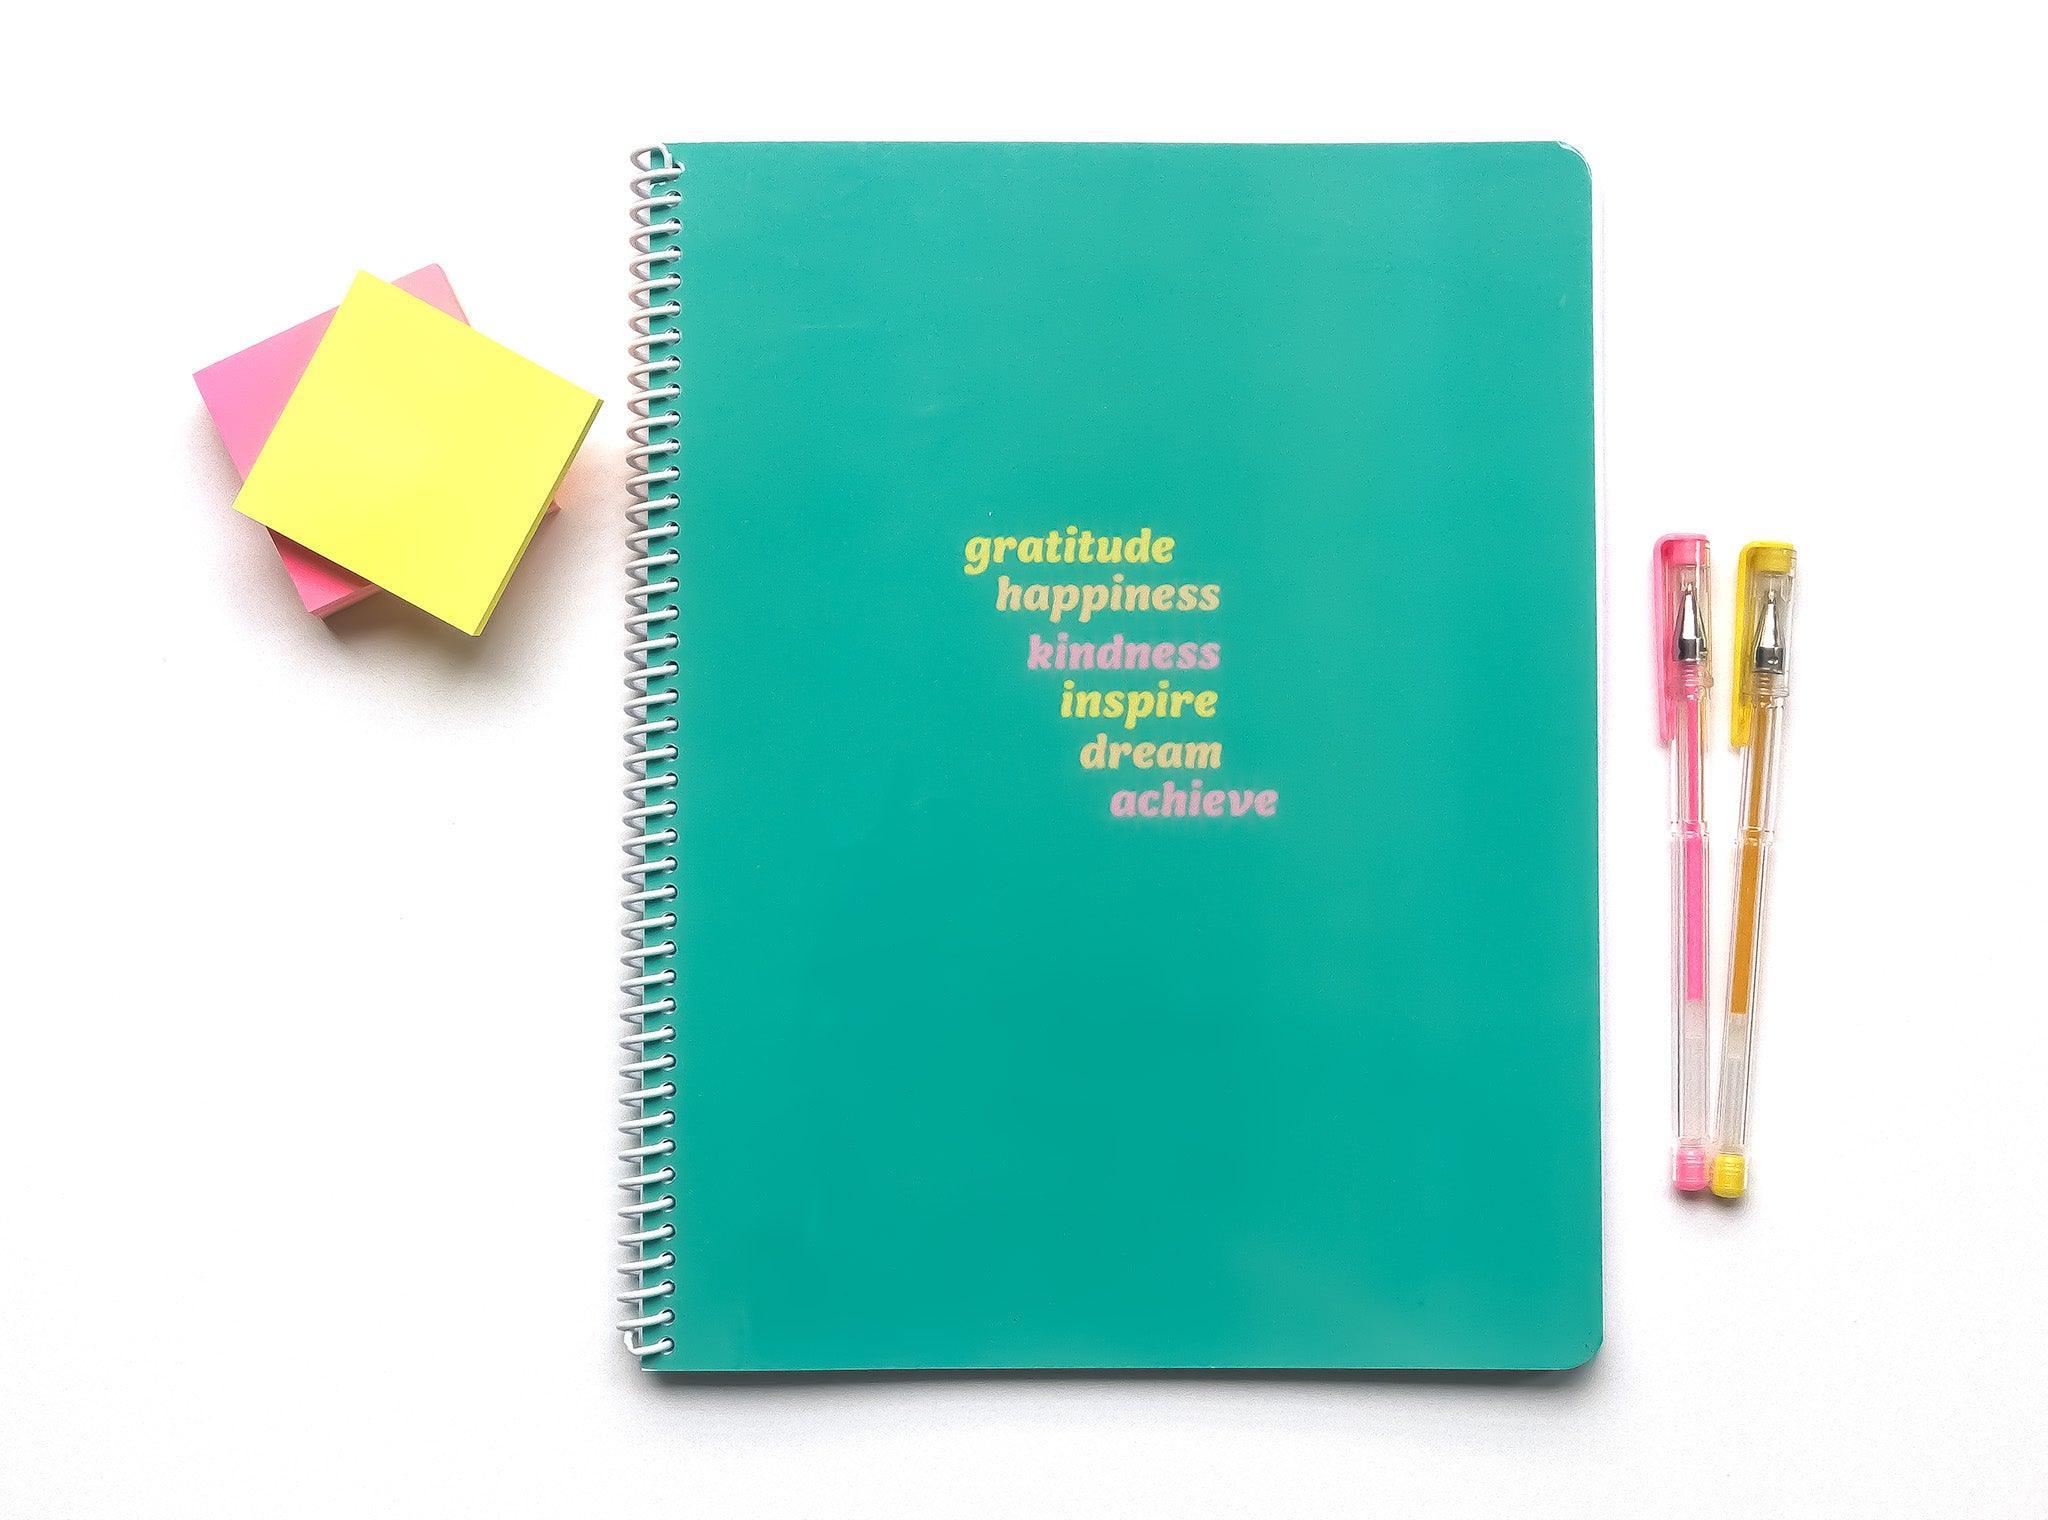 Get Inspired Notebook flat lay - cover features inspirational words like gratitude, happiness, kindness, inspire, dream, and achieve